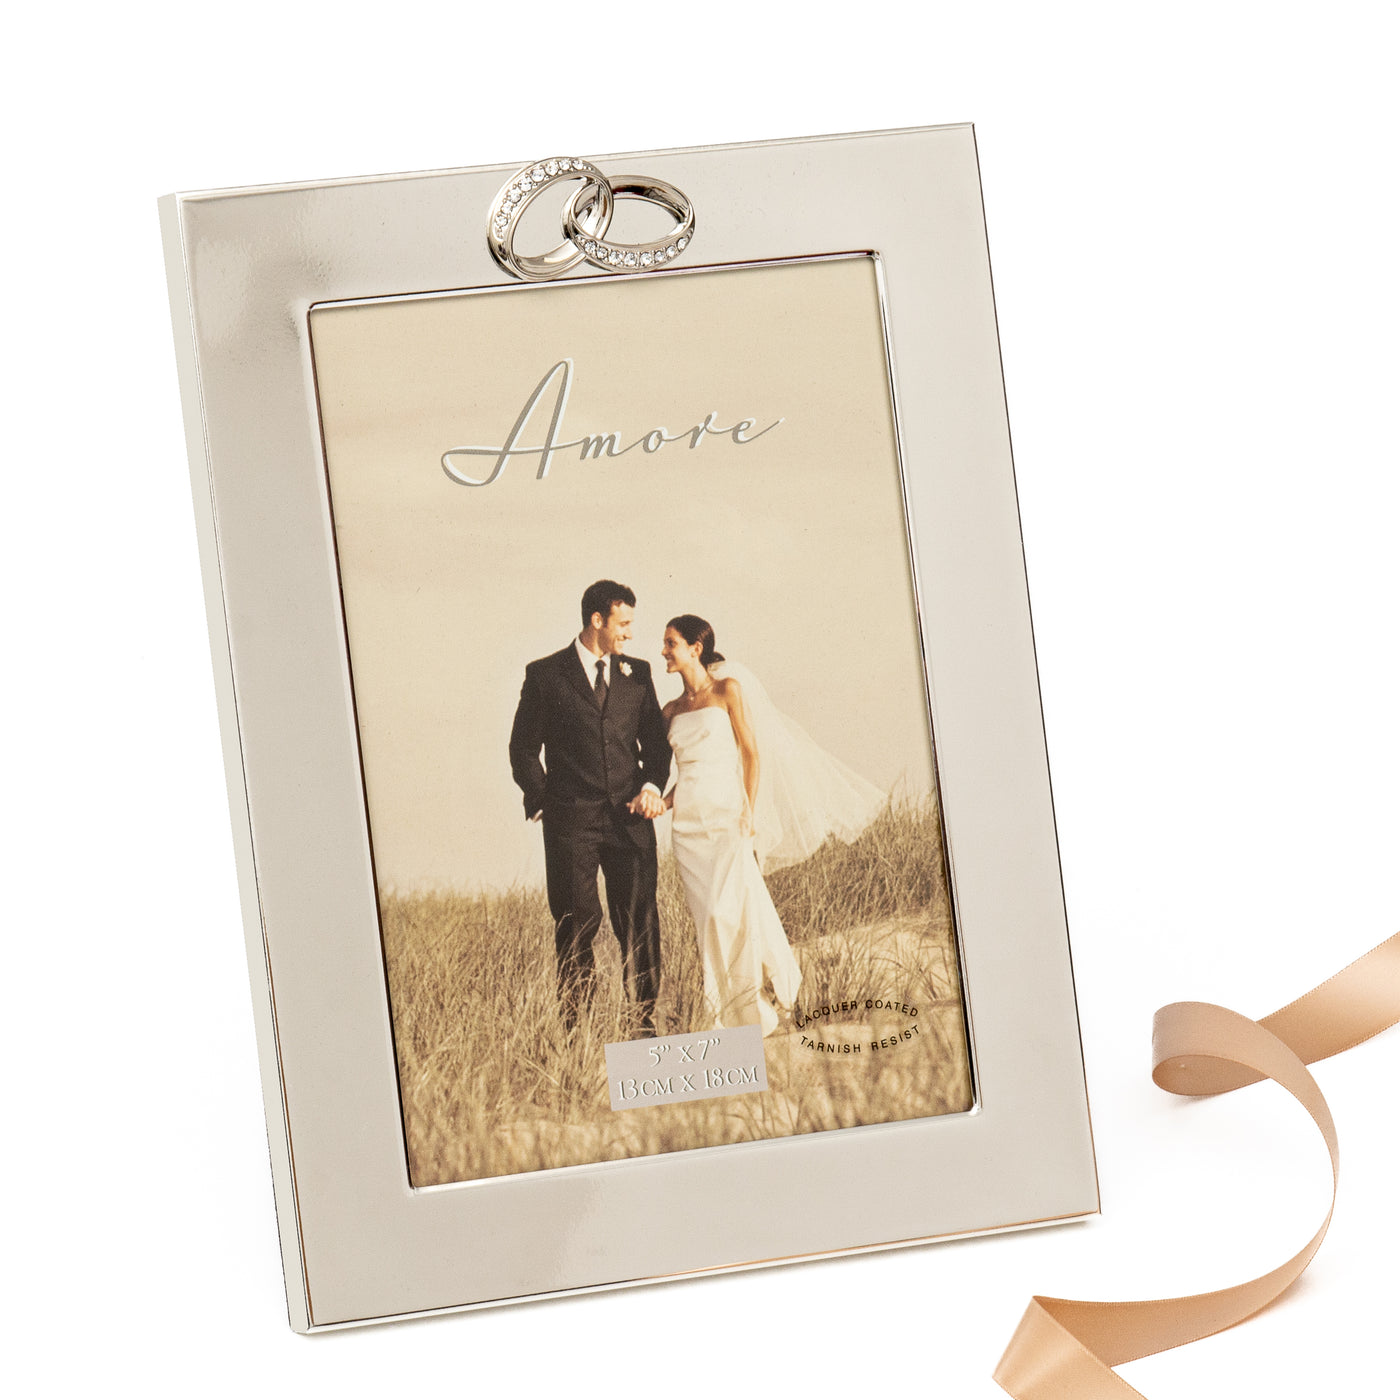 Personalised Wedding Frame - Silver-Plated With this Ring - 5" x 7"